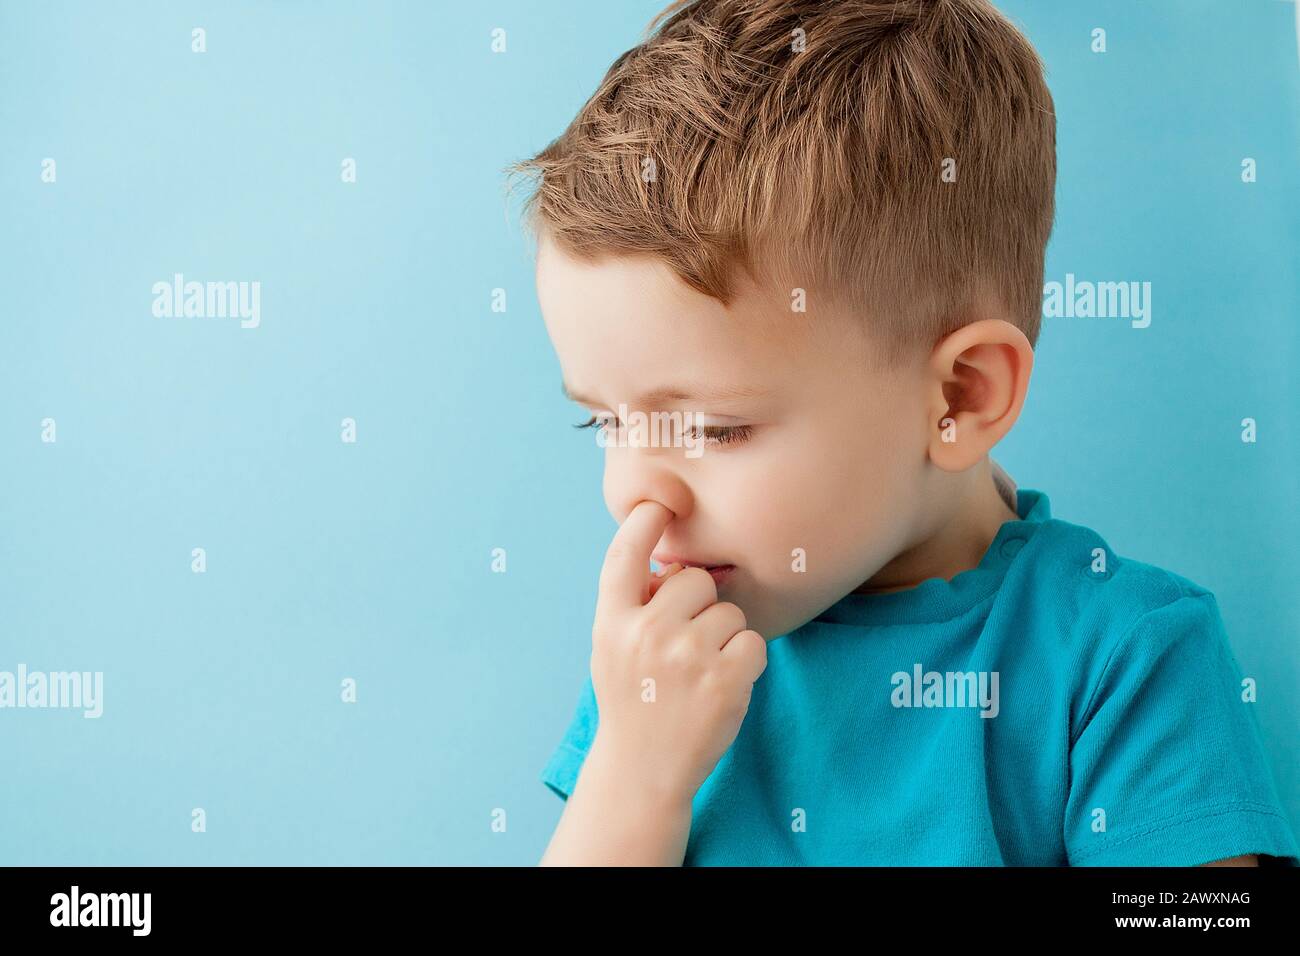 Little caucasian boy picking his nose on blue background Stock Photo